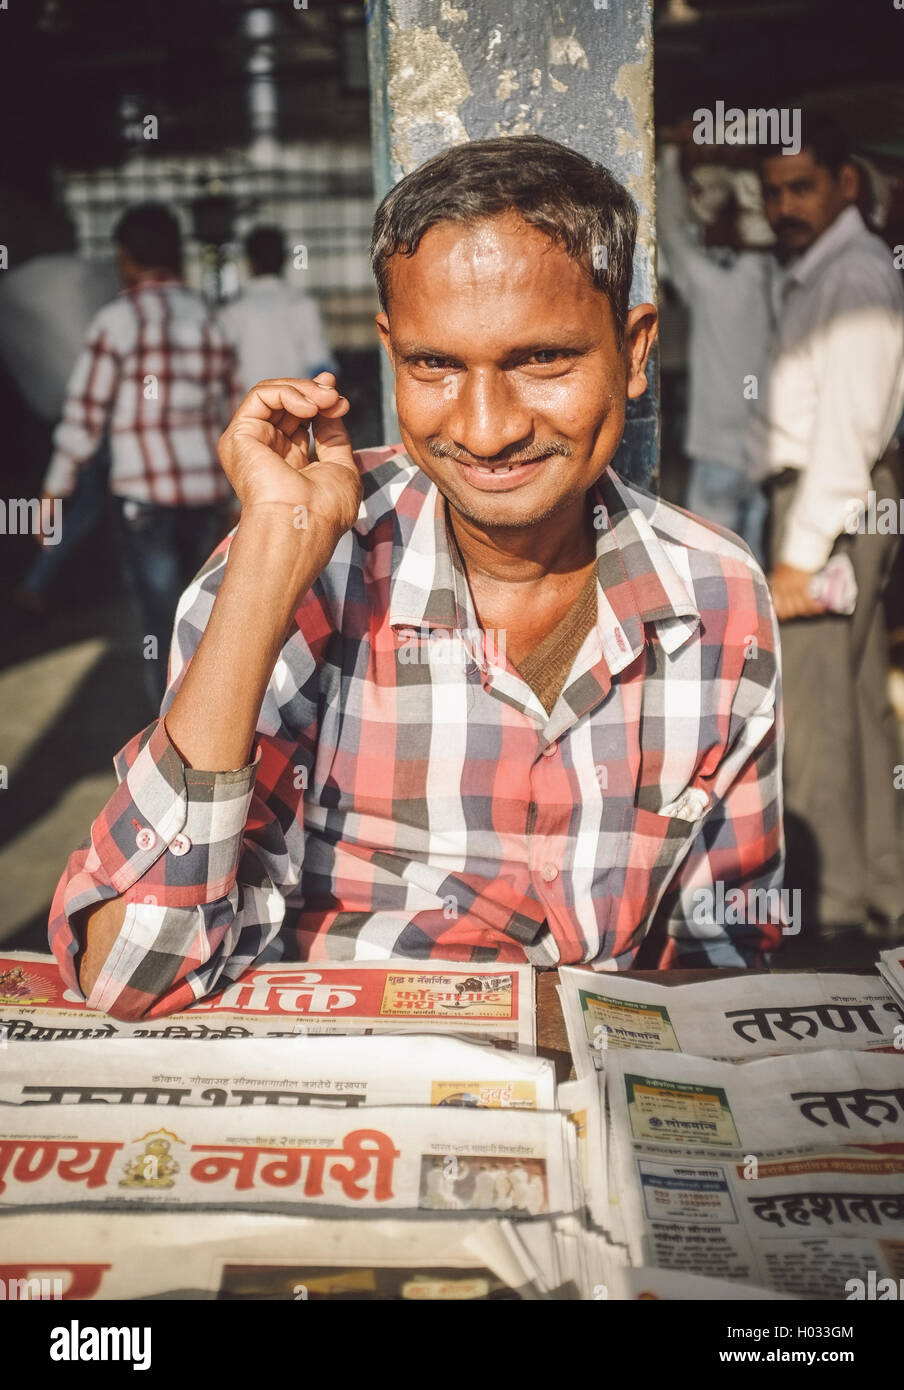 MUMBAI, INDIA - 08 JANUARY 2015: India man sells newspapers in front of train station. Post-processed with grain, texture and co Stock Photo